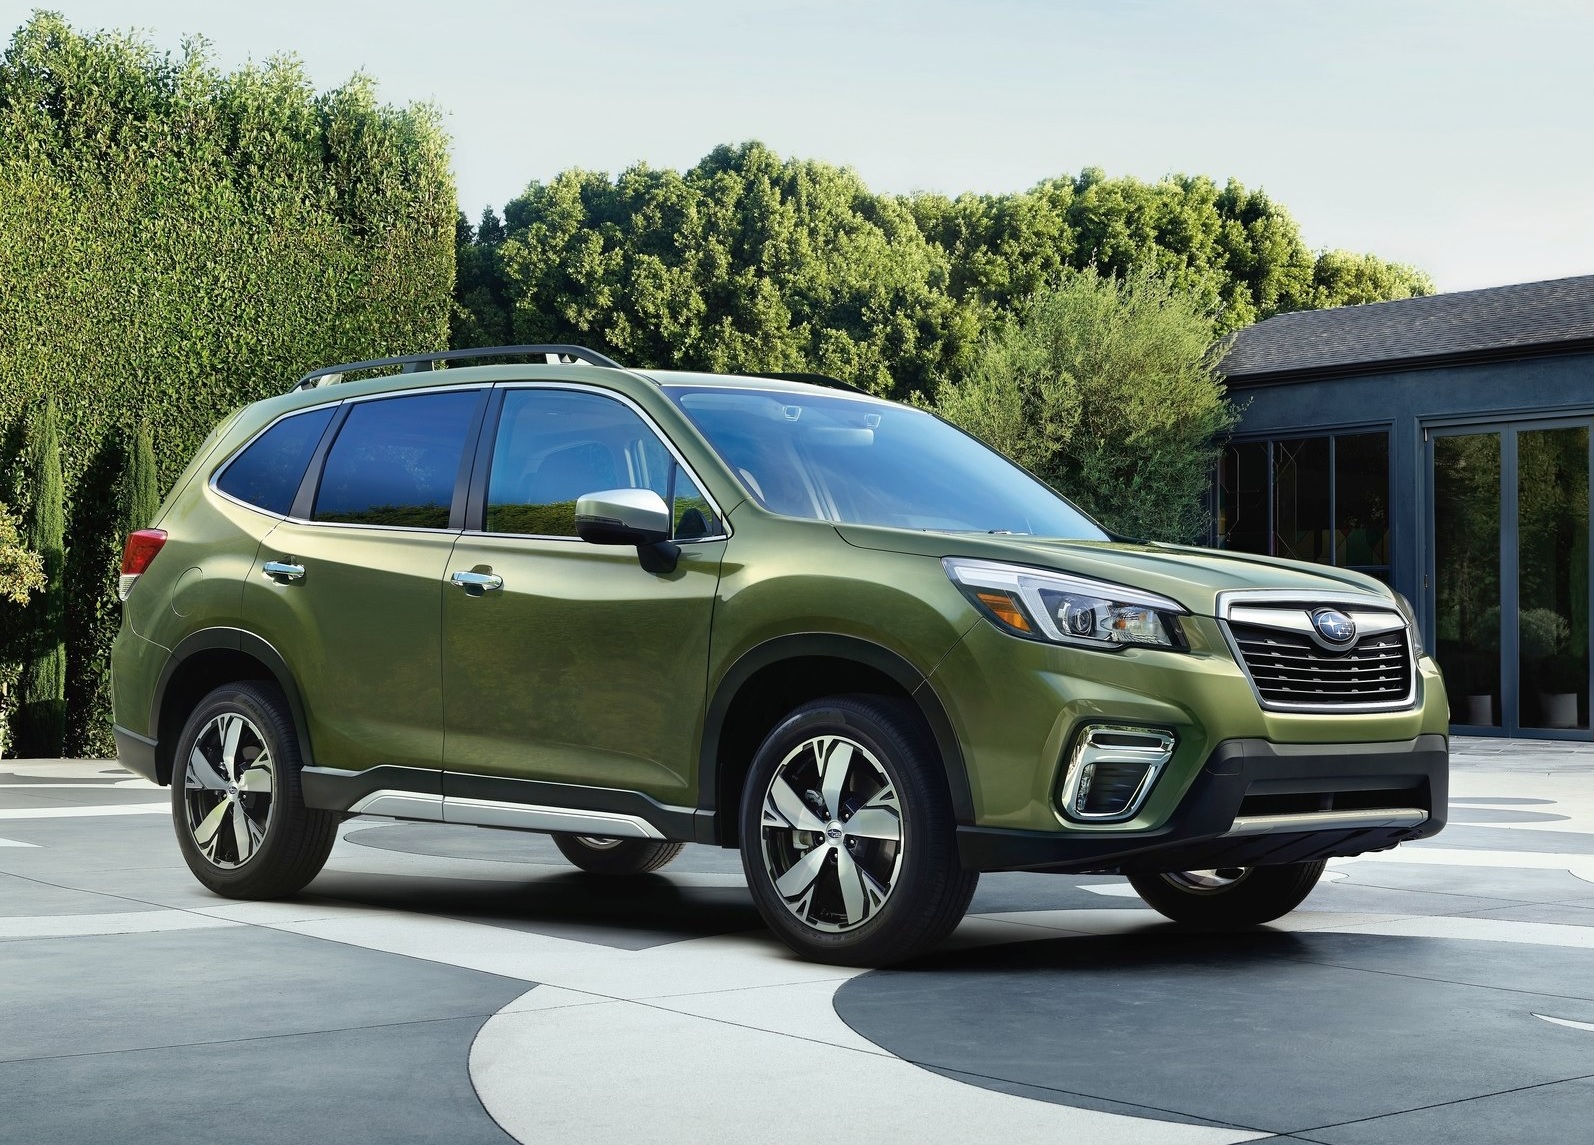 2021 Subaru Forester: Expectations and what we know so far